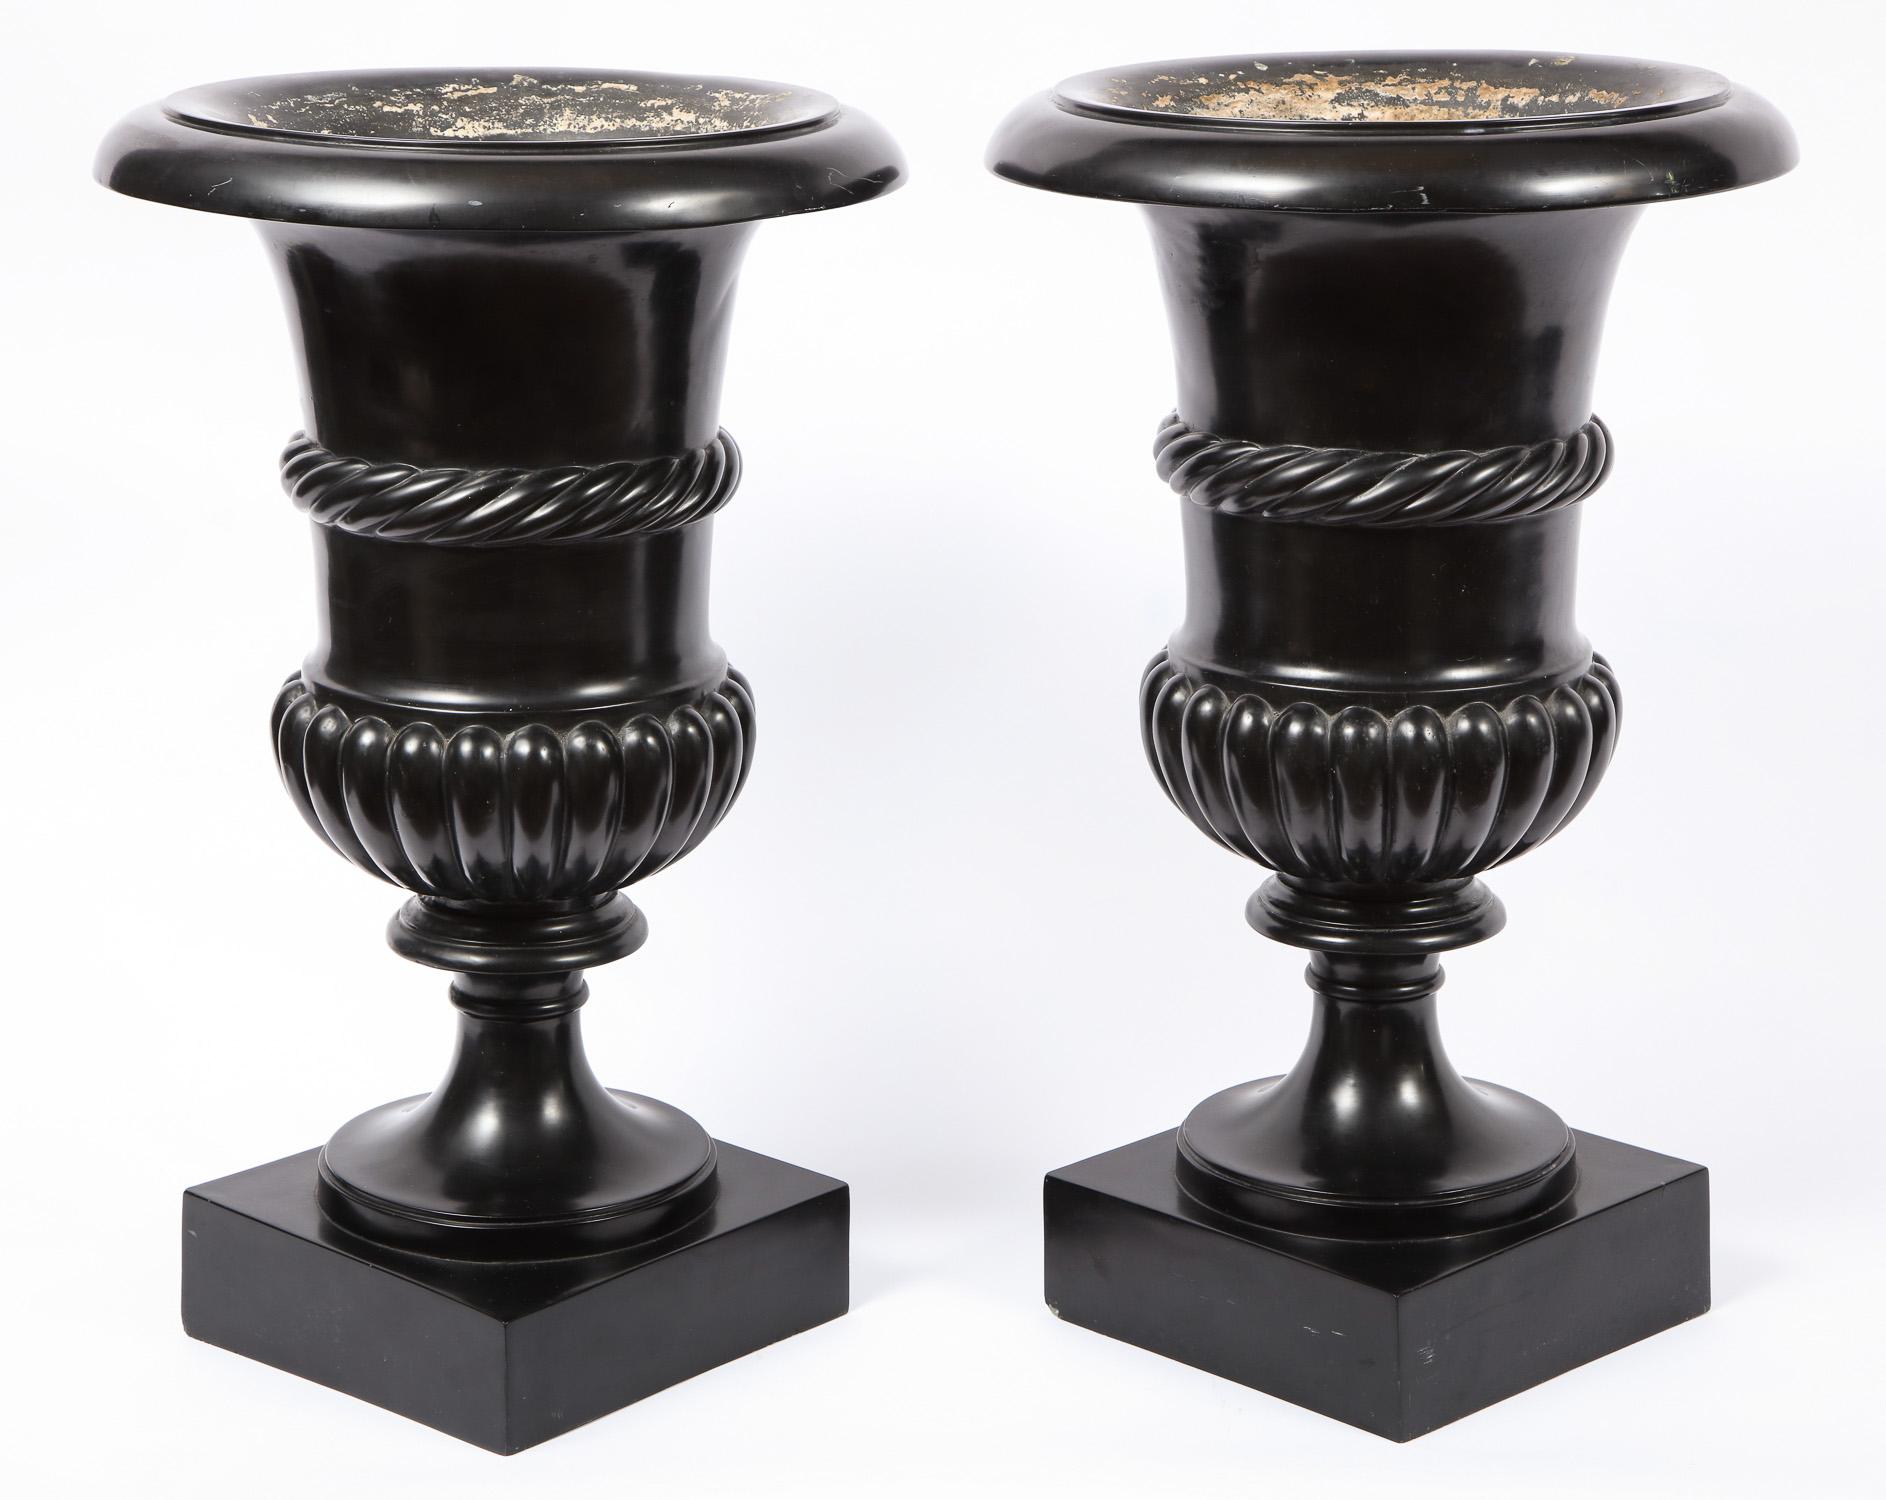 Pair of Antique Roman Neoclassical Campagna Shaped Black Scagliola Vases or Urns For Sale 3